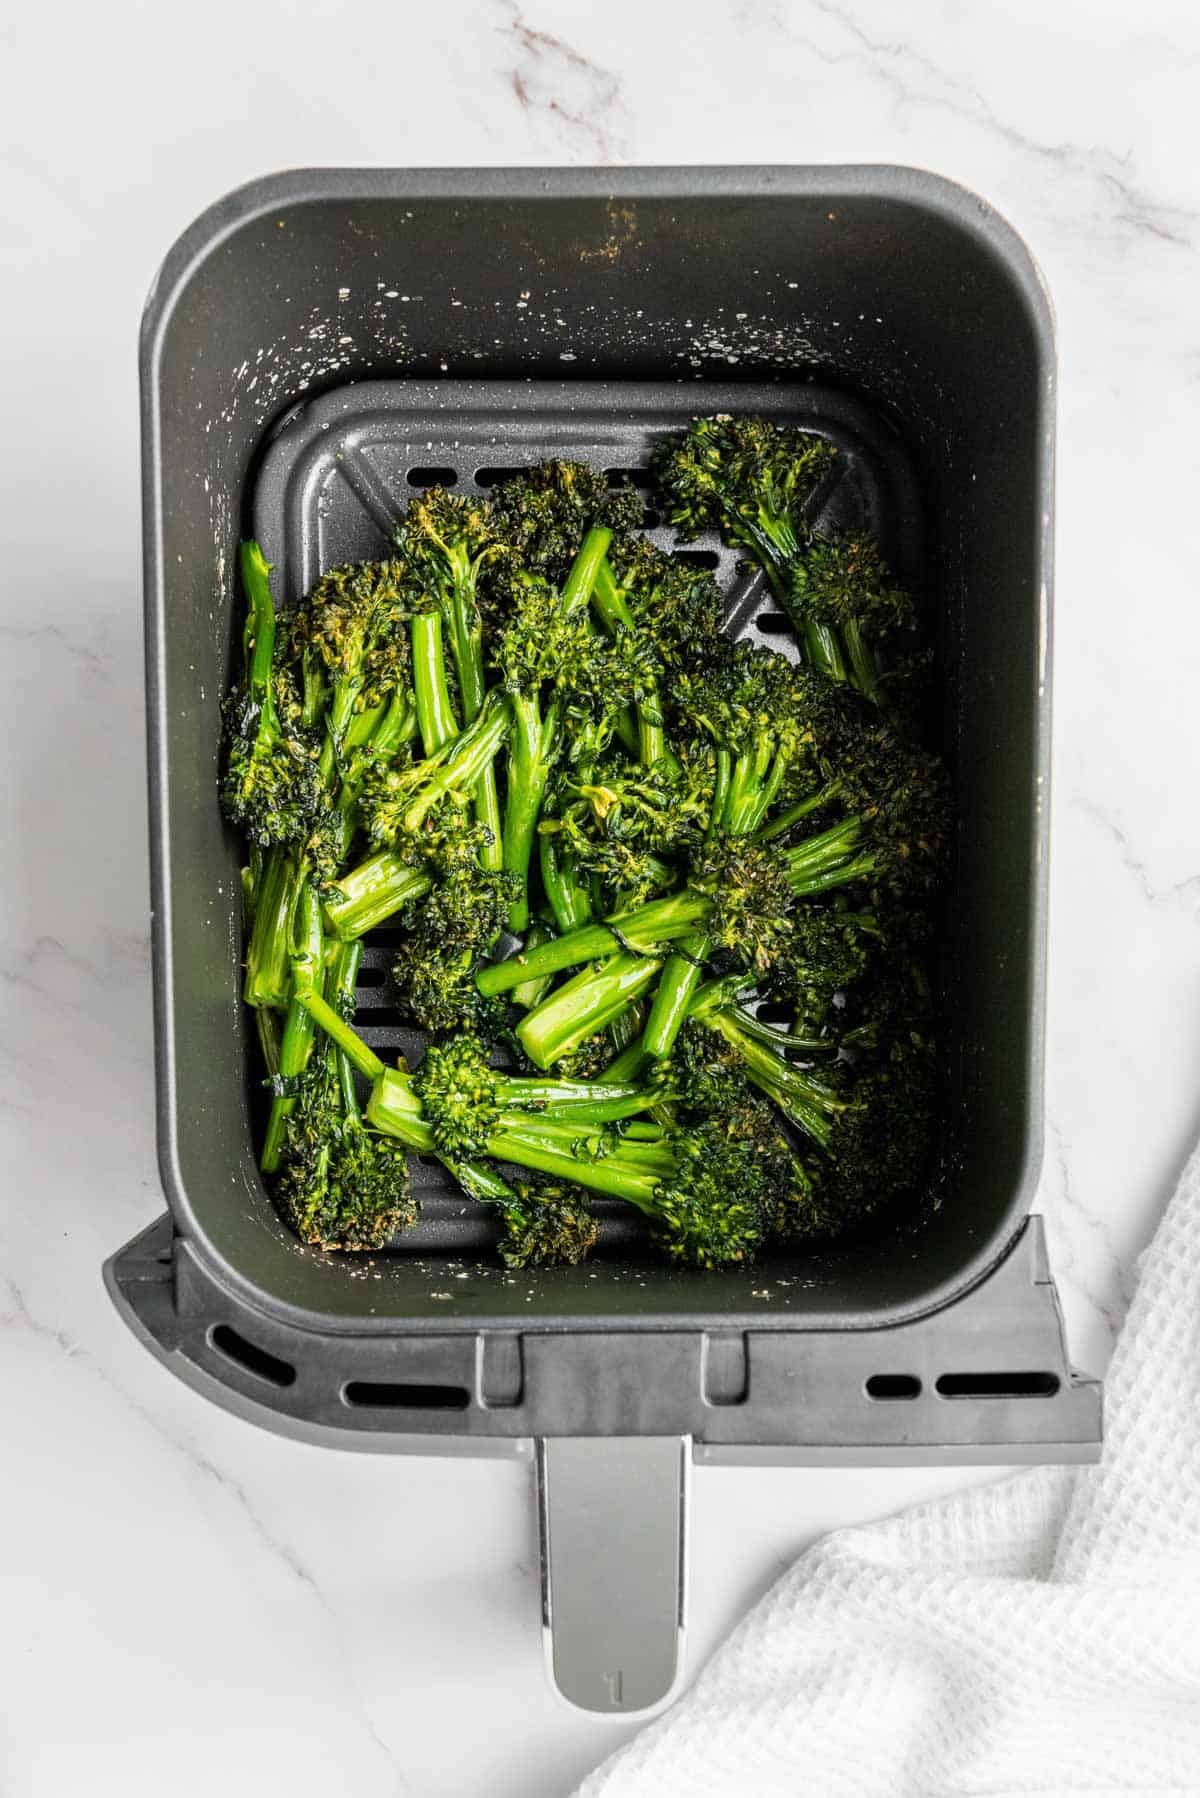 Looking inside the air fryer basket at freshly cooked broccolini.